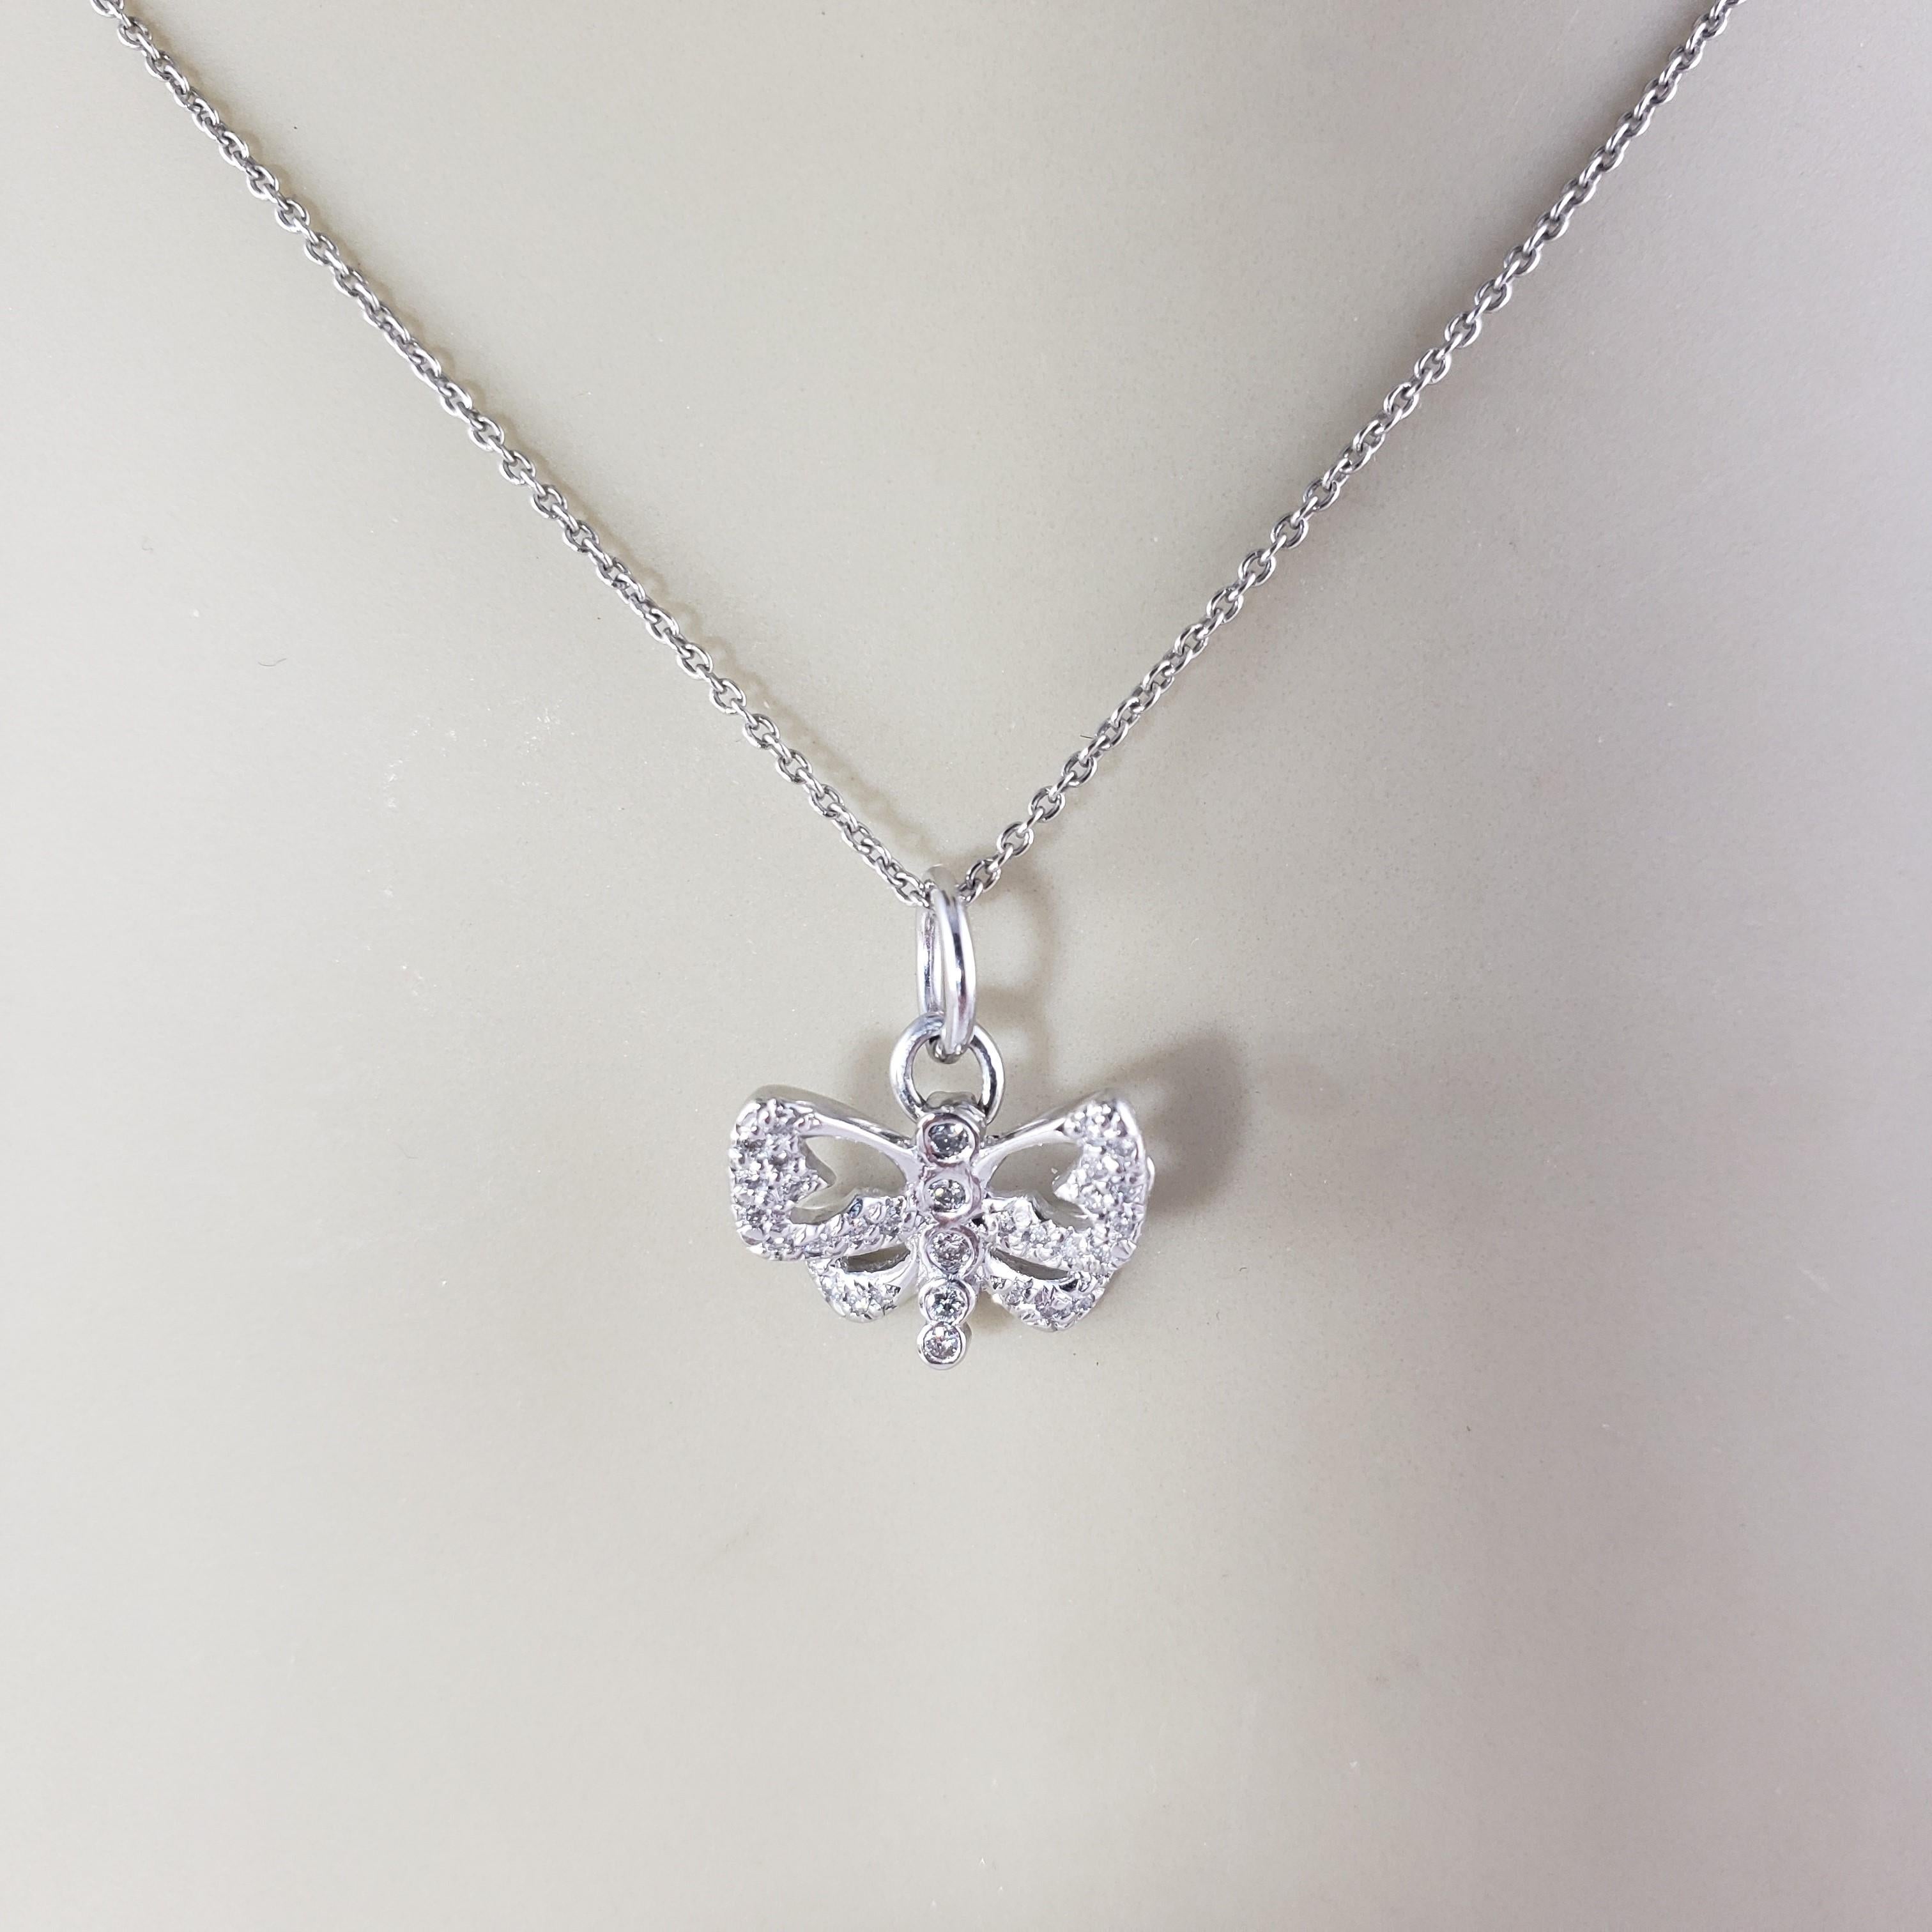 Roberto Coin 18 Karat White Gold and Diamond Butterfly Pendant #16637 For Sale 2